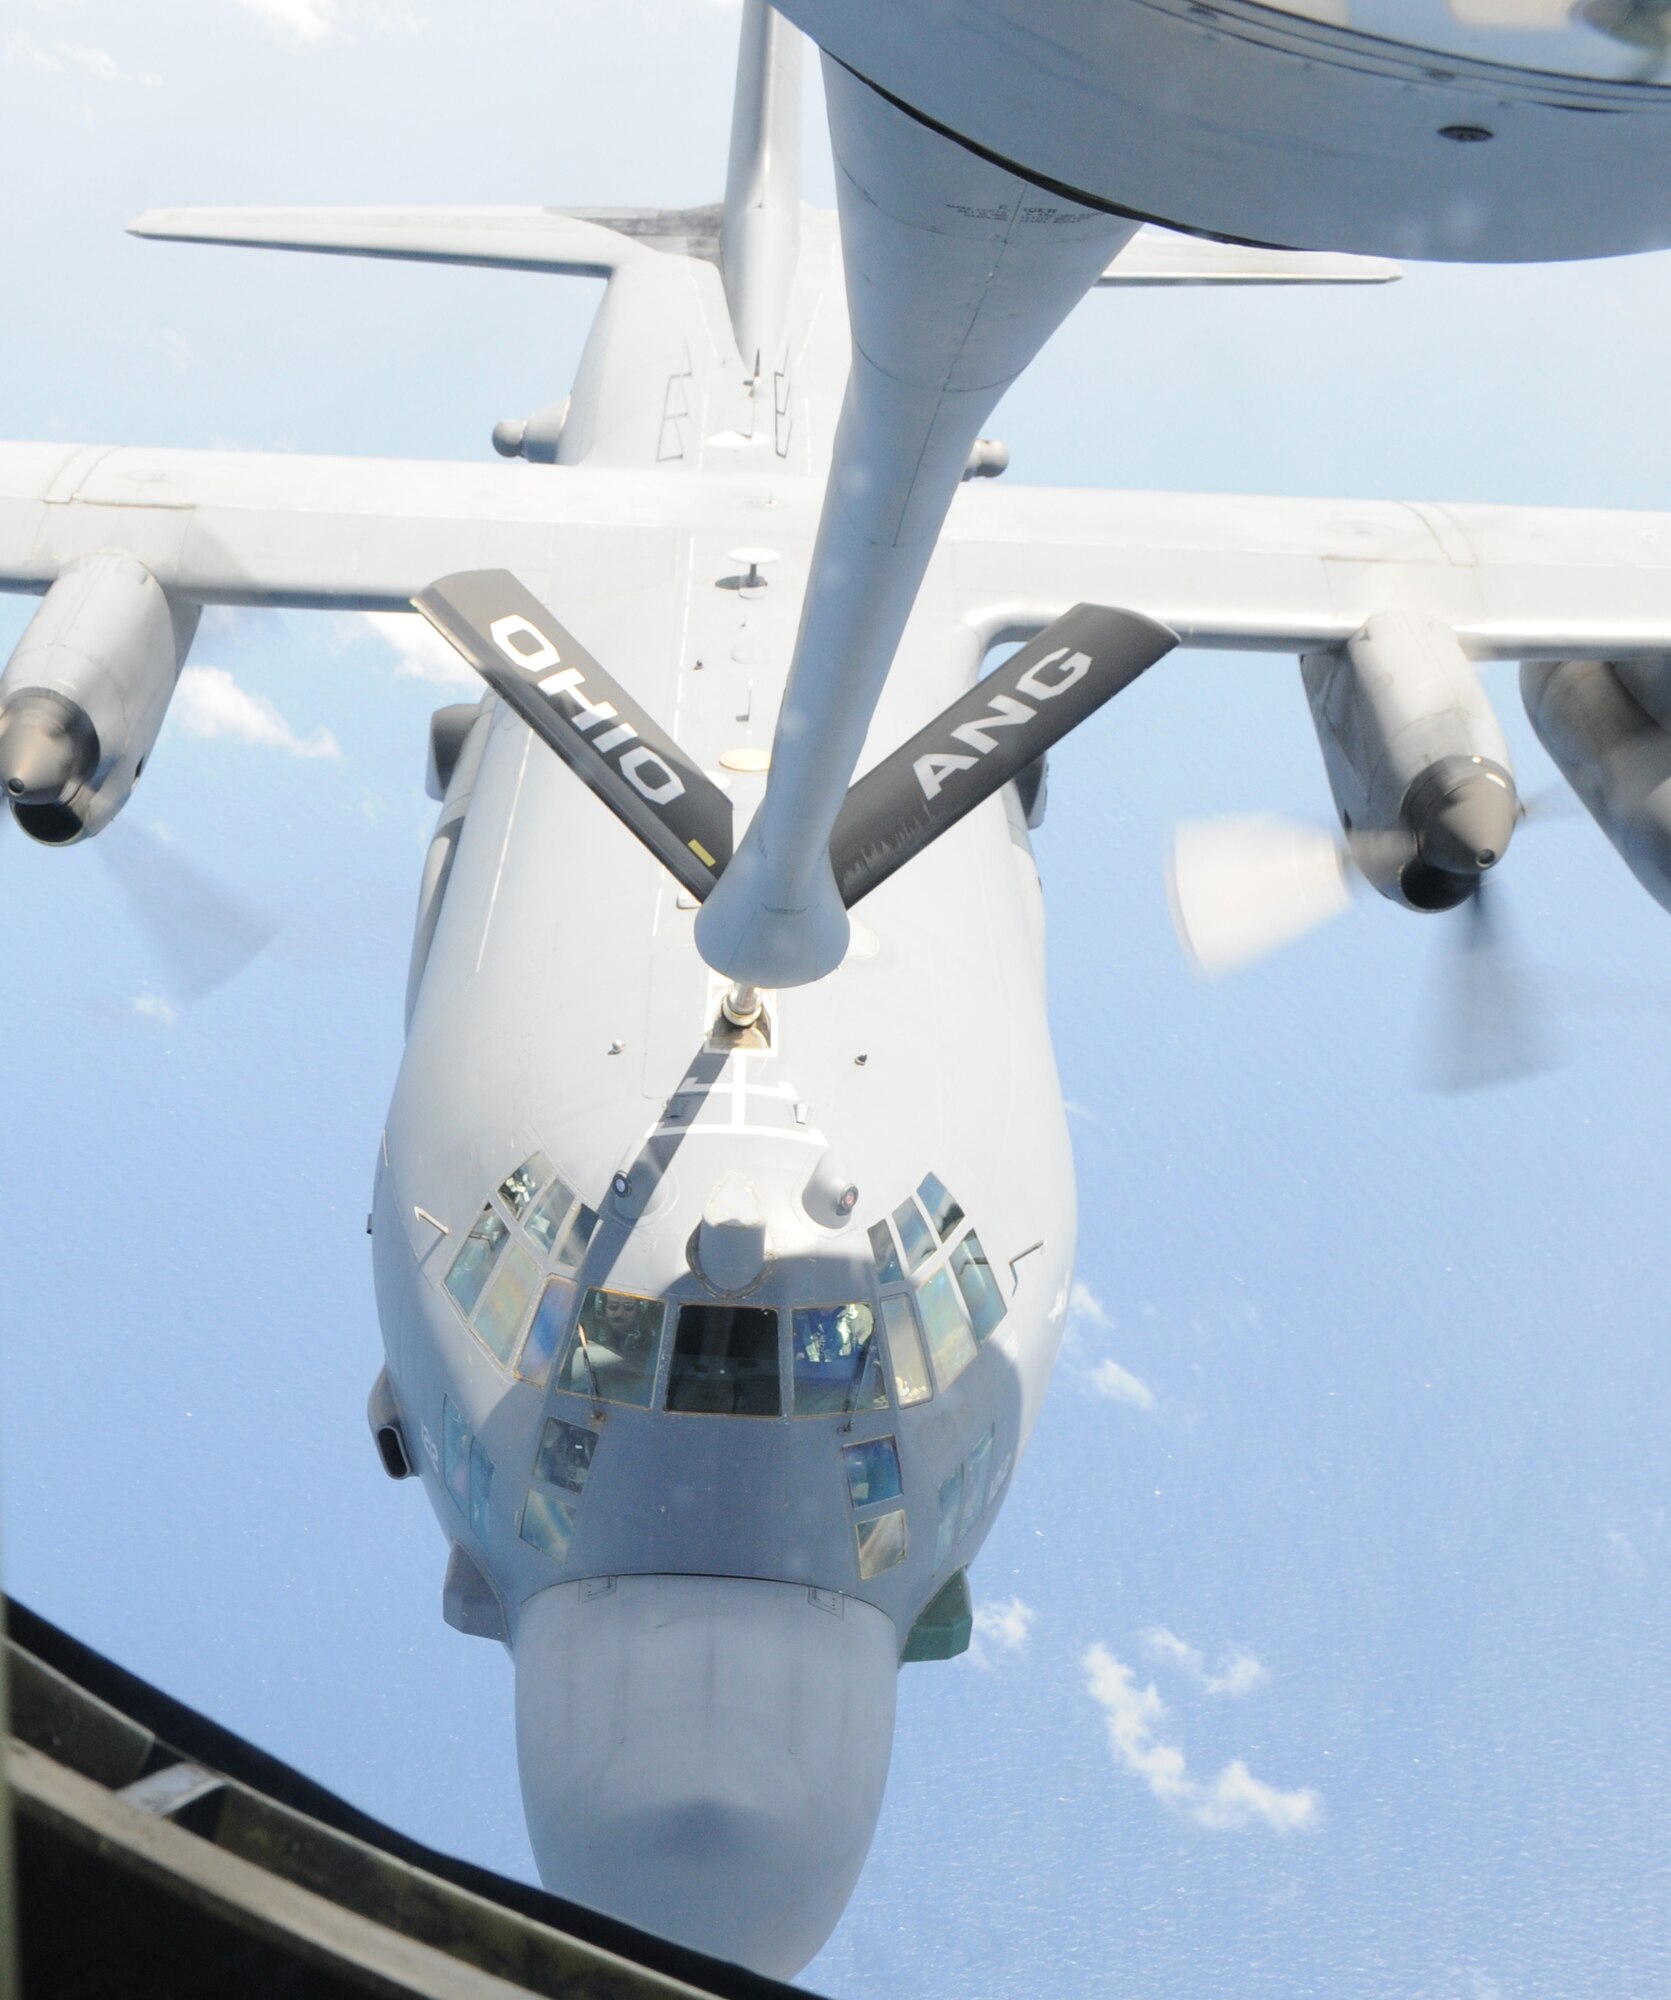 OVER THE PACIFIC OCEAN -- A MC-130H Combat Talon II from the 1st Special Operations Squadron refuels from a KC-135 from the Ohio Air National Guard June 14. Both aircraft are returning from Malaysia after supporting Teak Mint 09-1, a training exchange designed to enhance U.S and Malaysian military training and capabilities. (U.S. Air Force photo by Tech. Sgt. Aaron Cram)